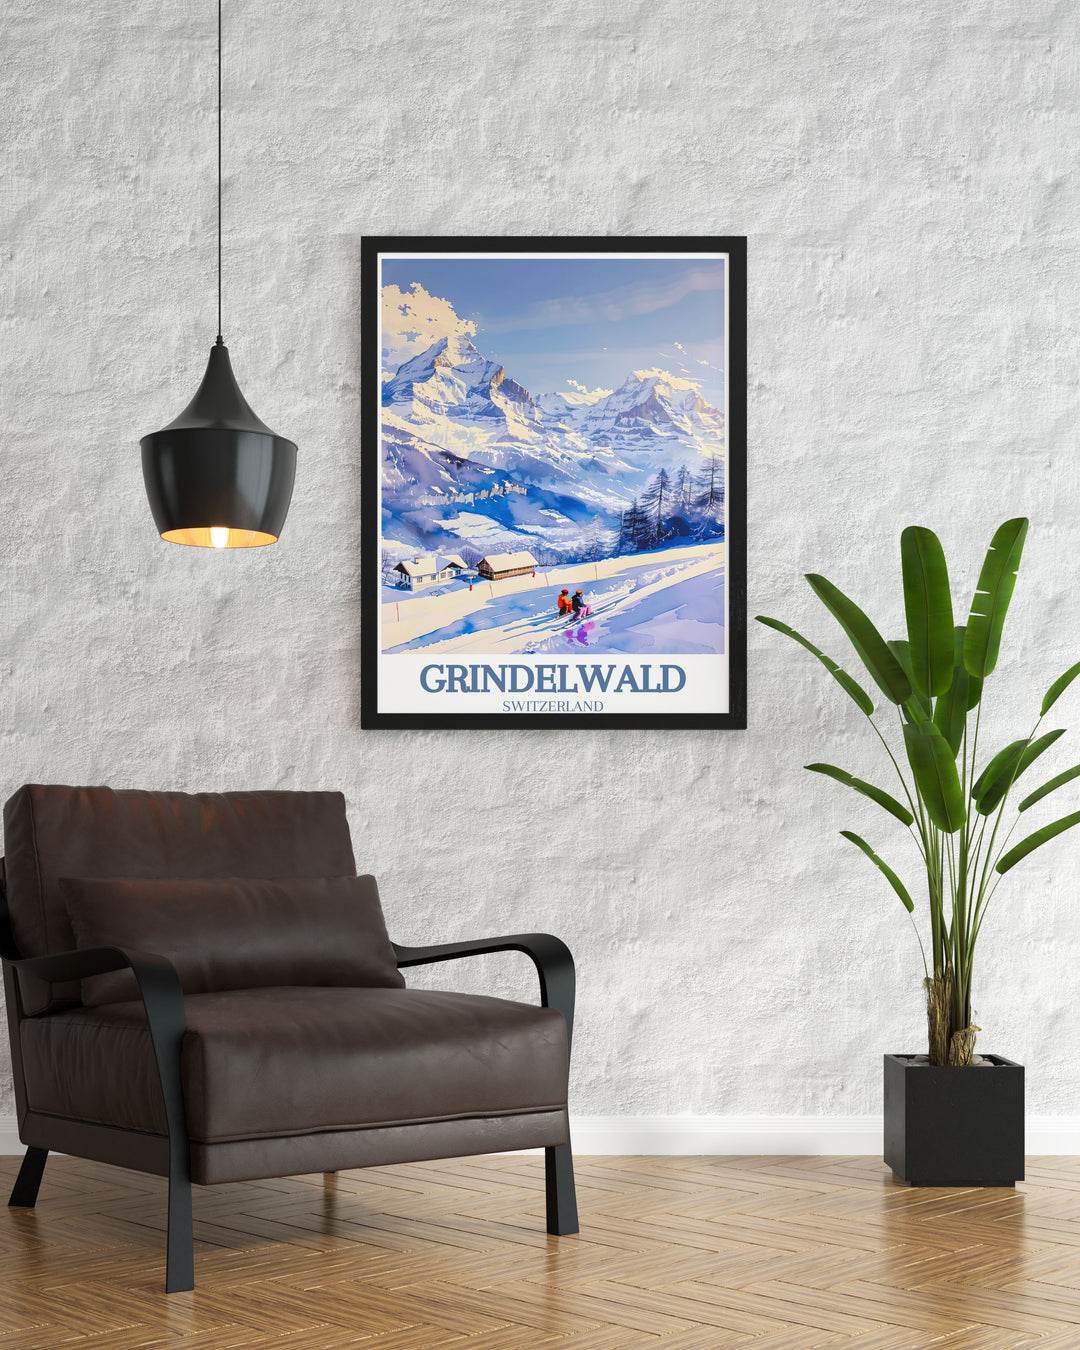 Featuring the extensive slopes and vibrant atmosphere of the Jungfrau Ski Region, this travel poster captures the essence of winter sports and alpine adventure, making it an excellent addition to any room.